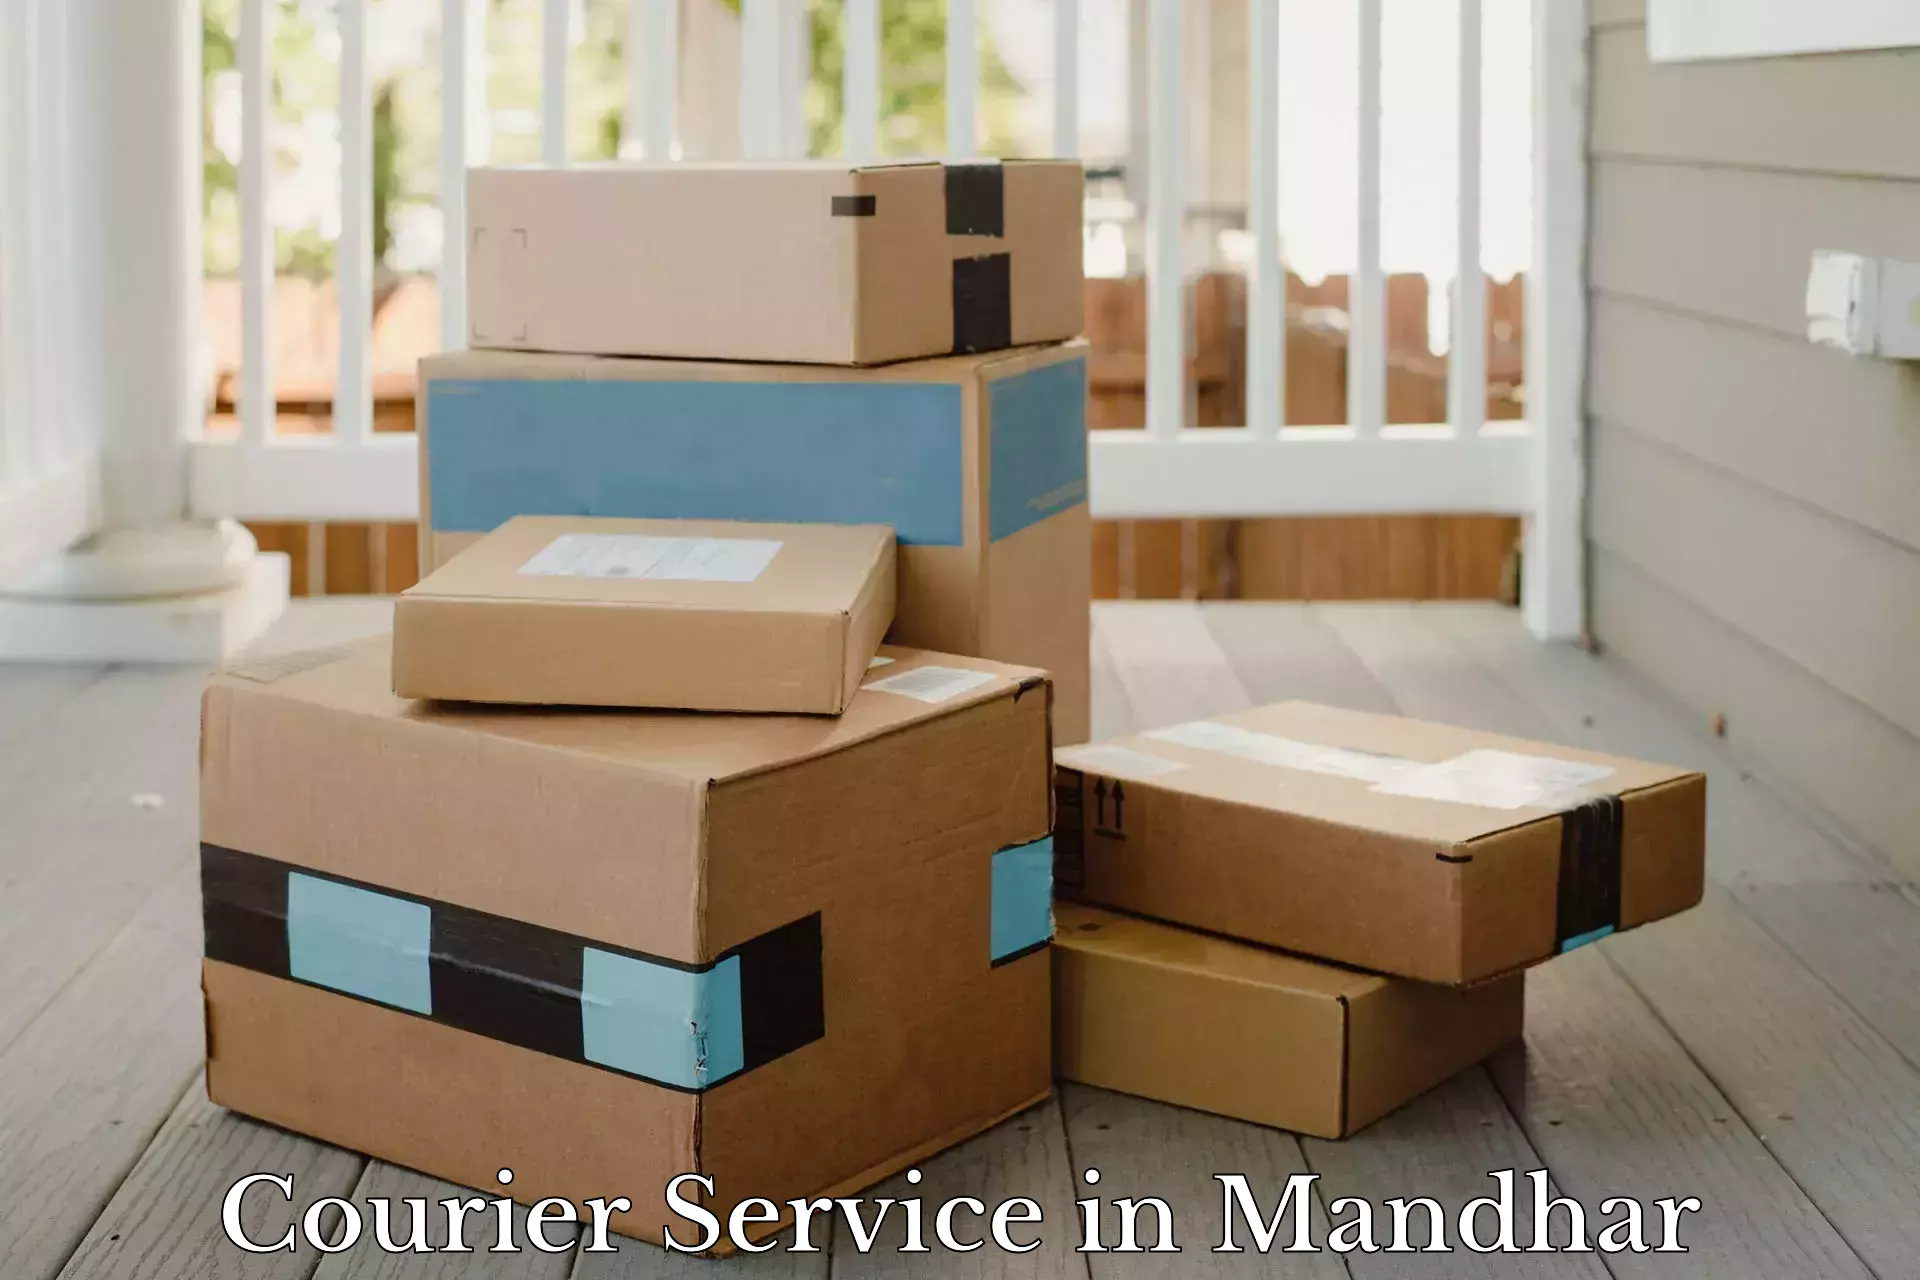 Rapid freight solutions in Mandhar